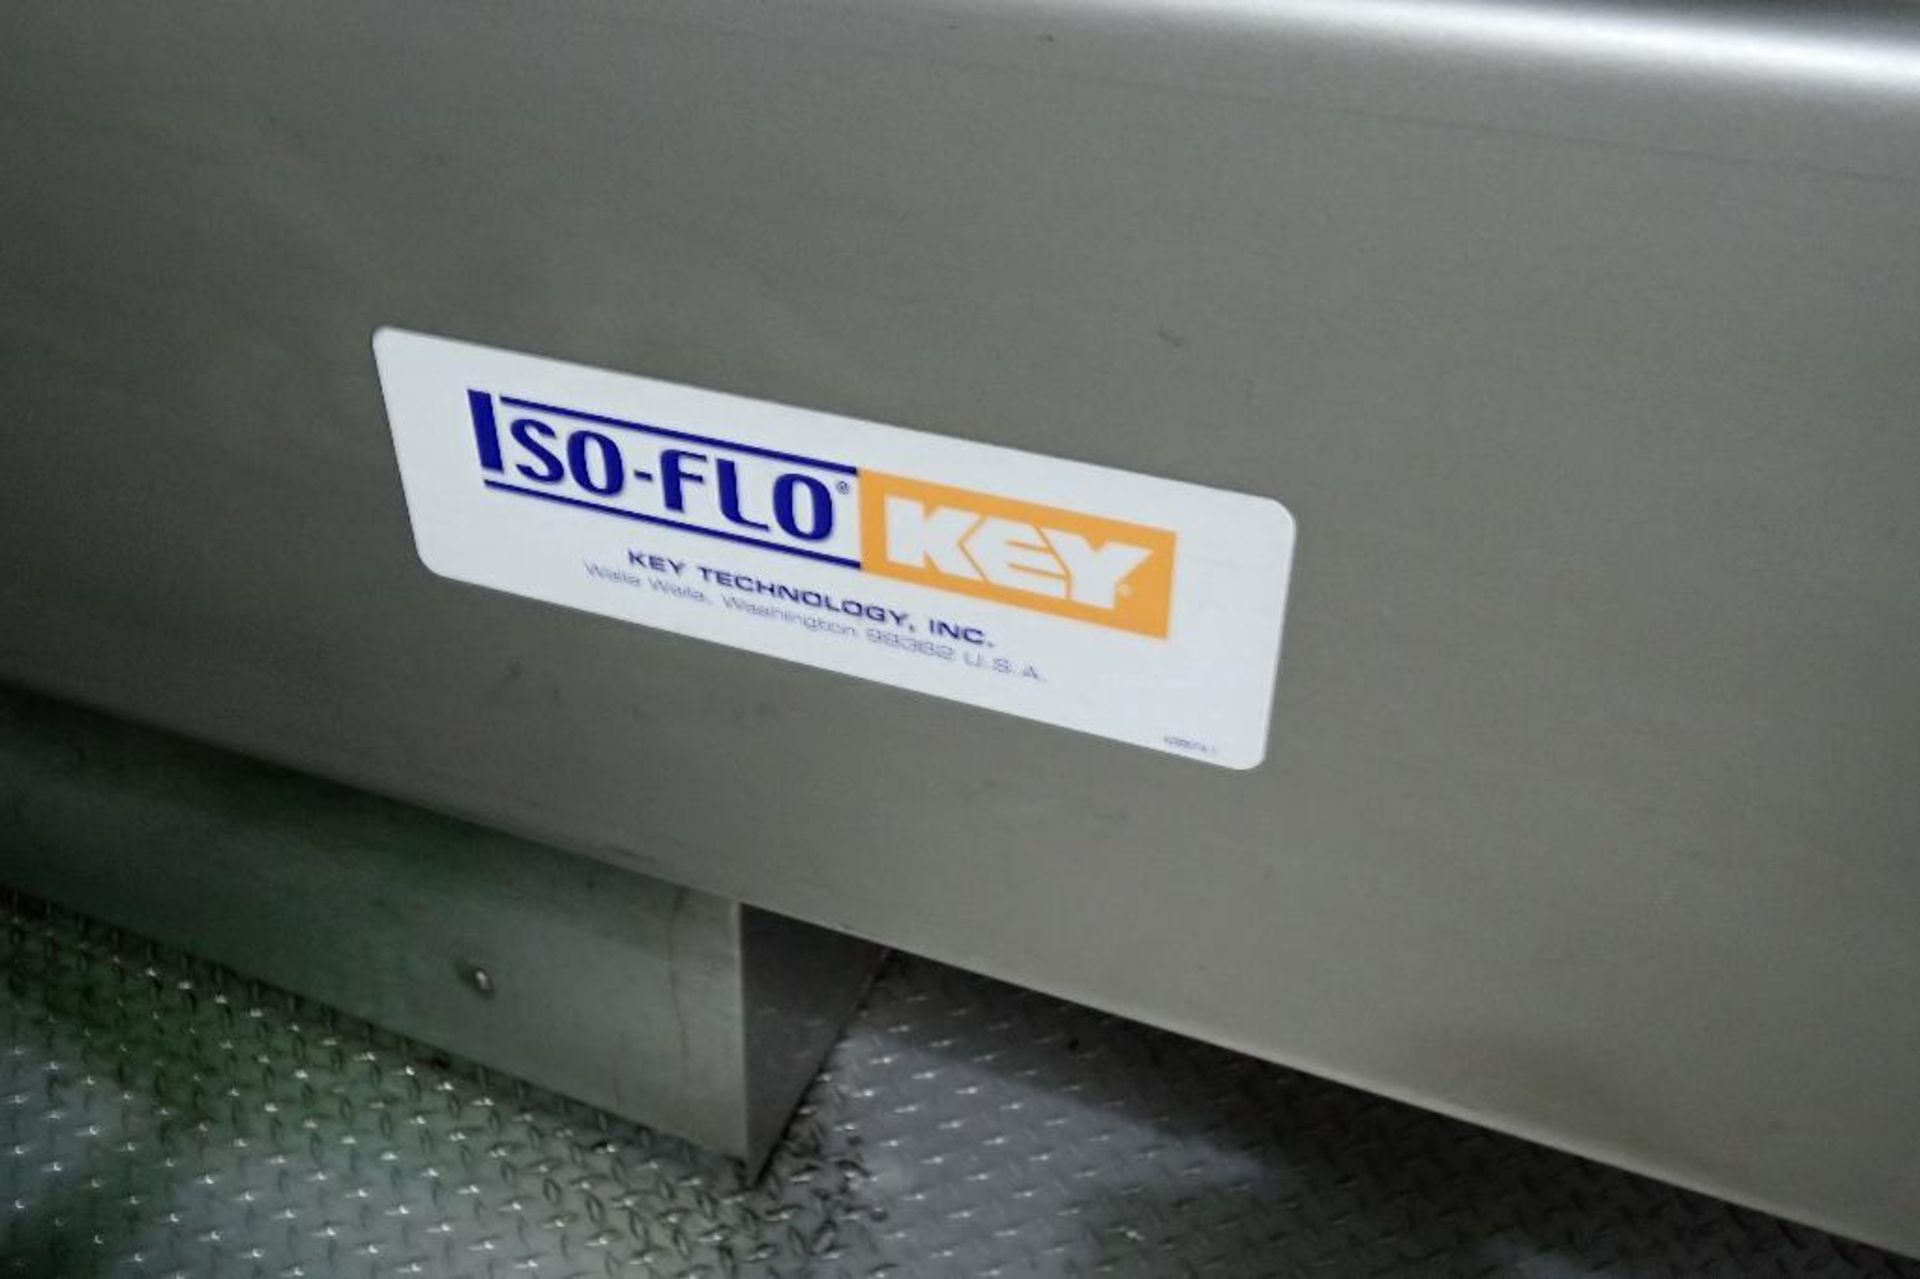 SS Key vibratory conveyor {Located in Lakeville, MN} - Image 5 of 8